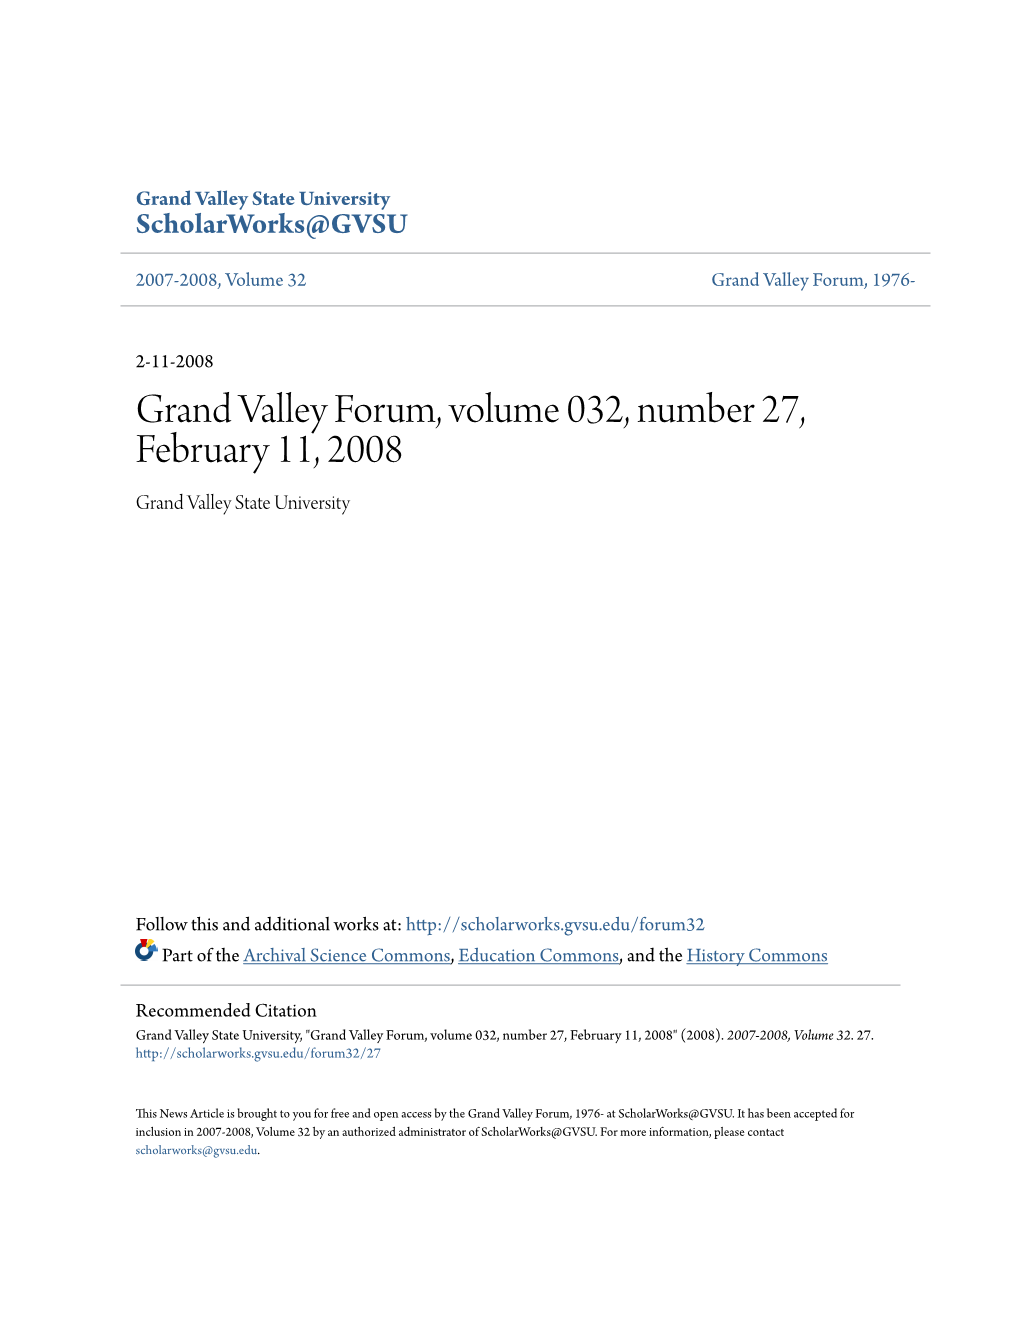 Grand Valley Forum, Volume 032, Number 27, February 11, 2008 Grand Valley State University